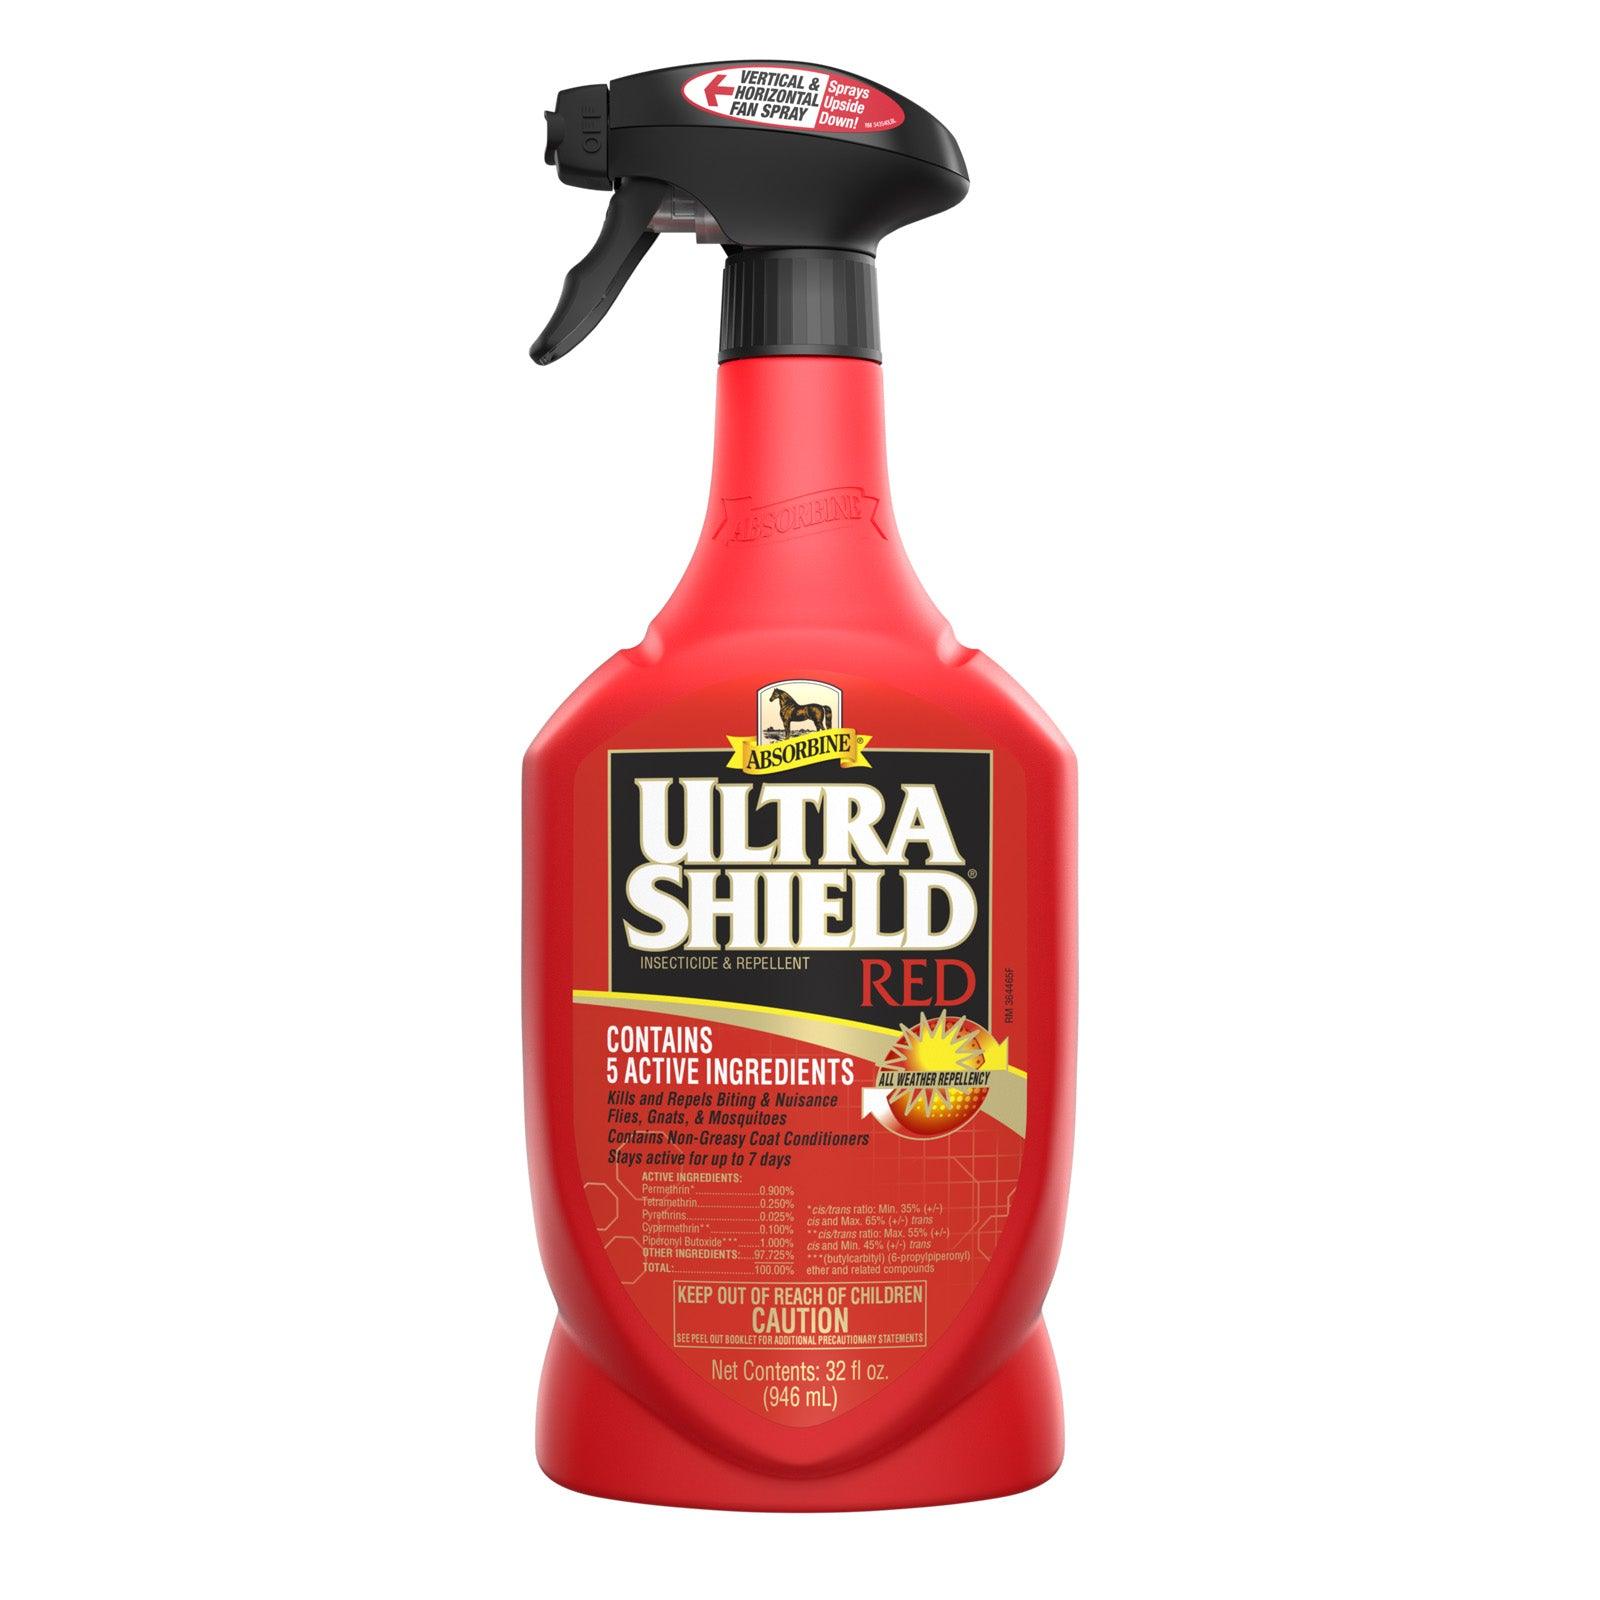 UltraShield® Red Insecticide & Repellent Fly Control absorbine Quart  